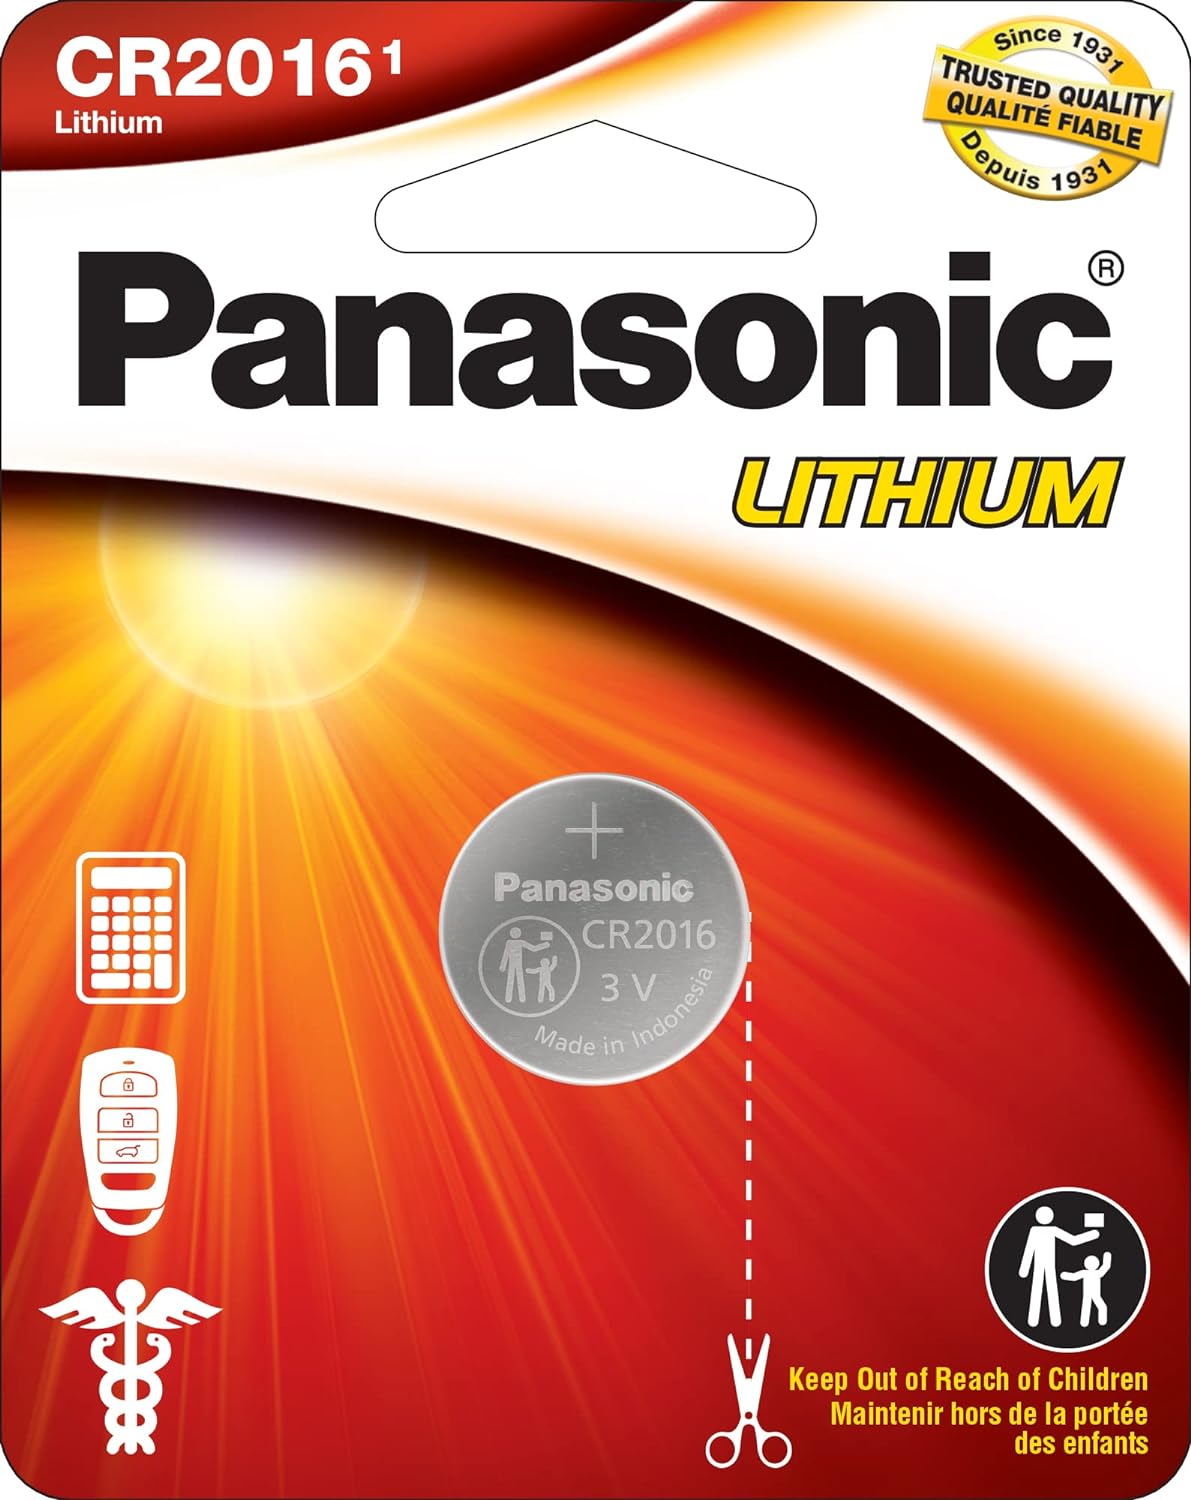 Panasonic CR2016 3V Lithium Coin Battery, Round at Rs 999/piece in New Delhi